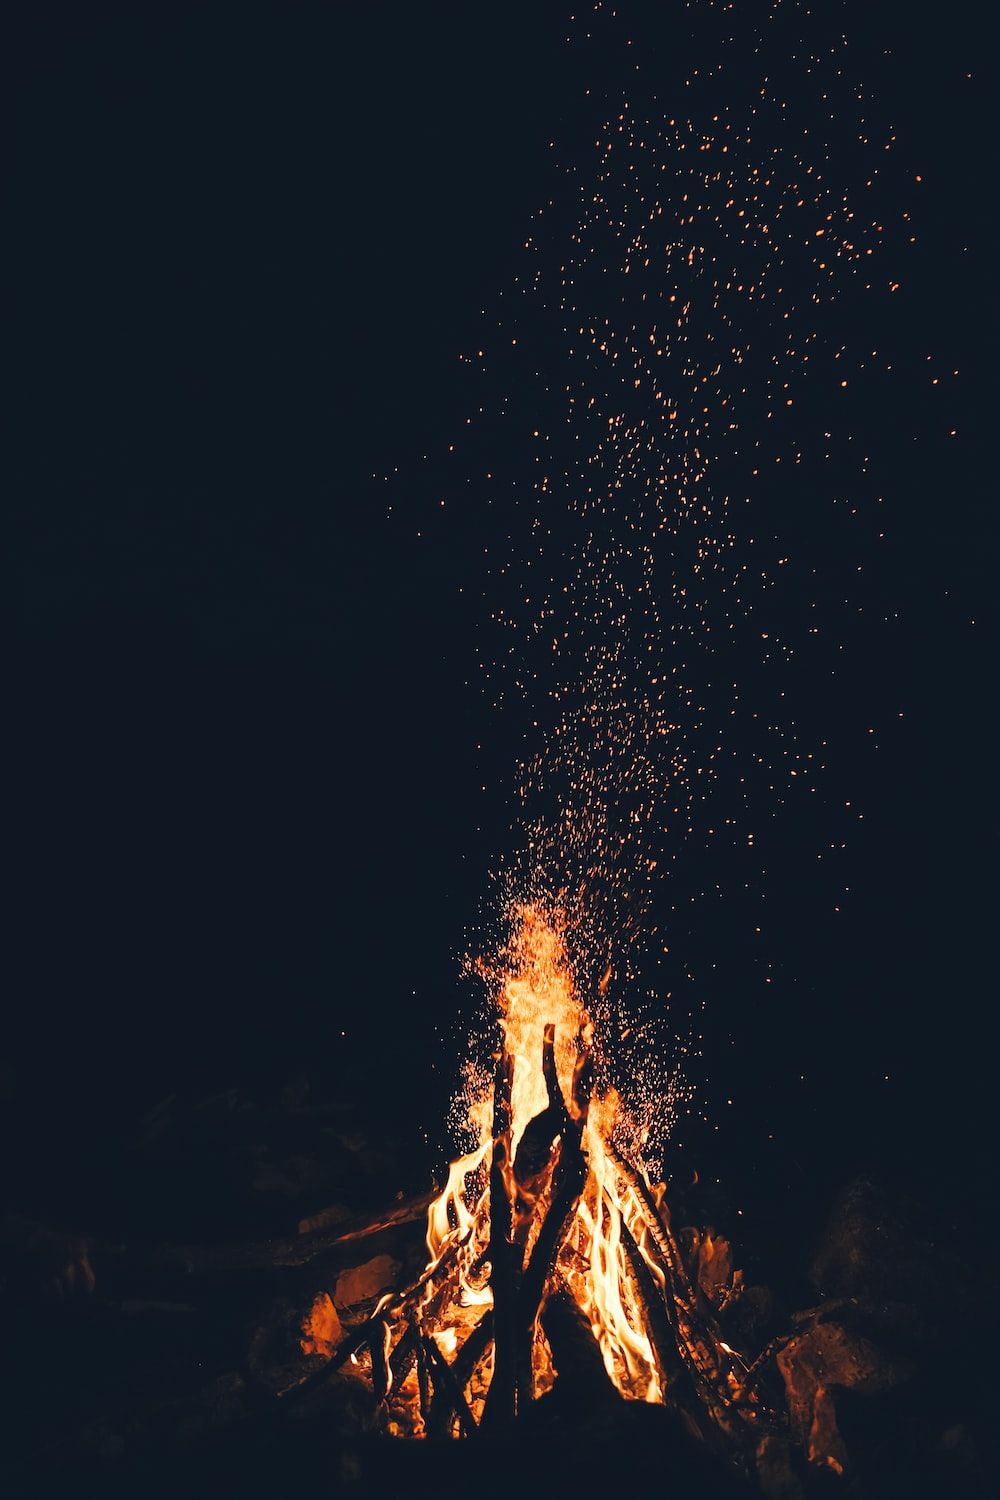 Fire Picture. Download Free Image